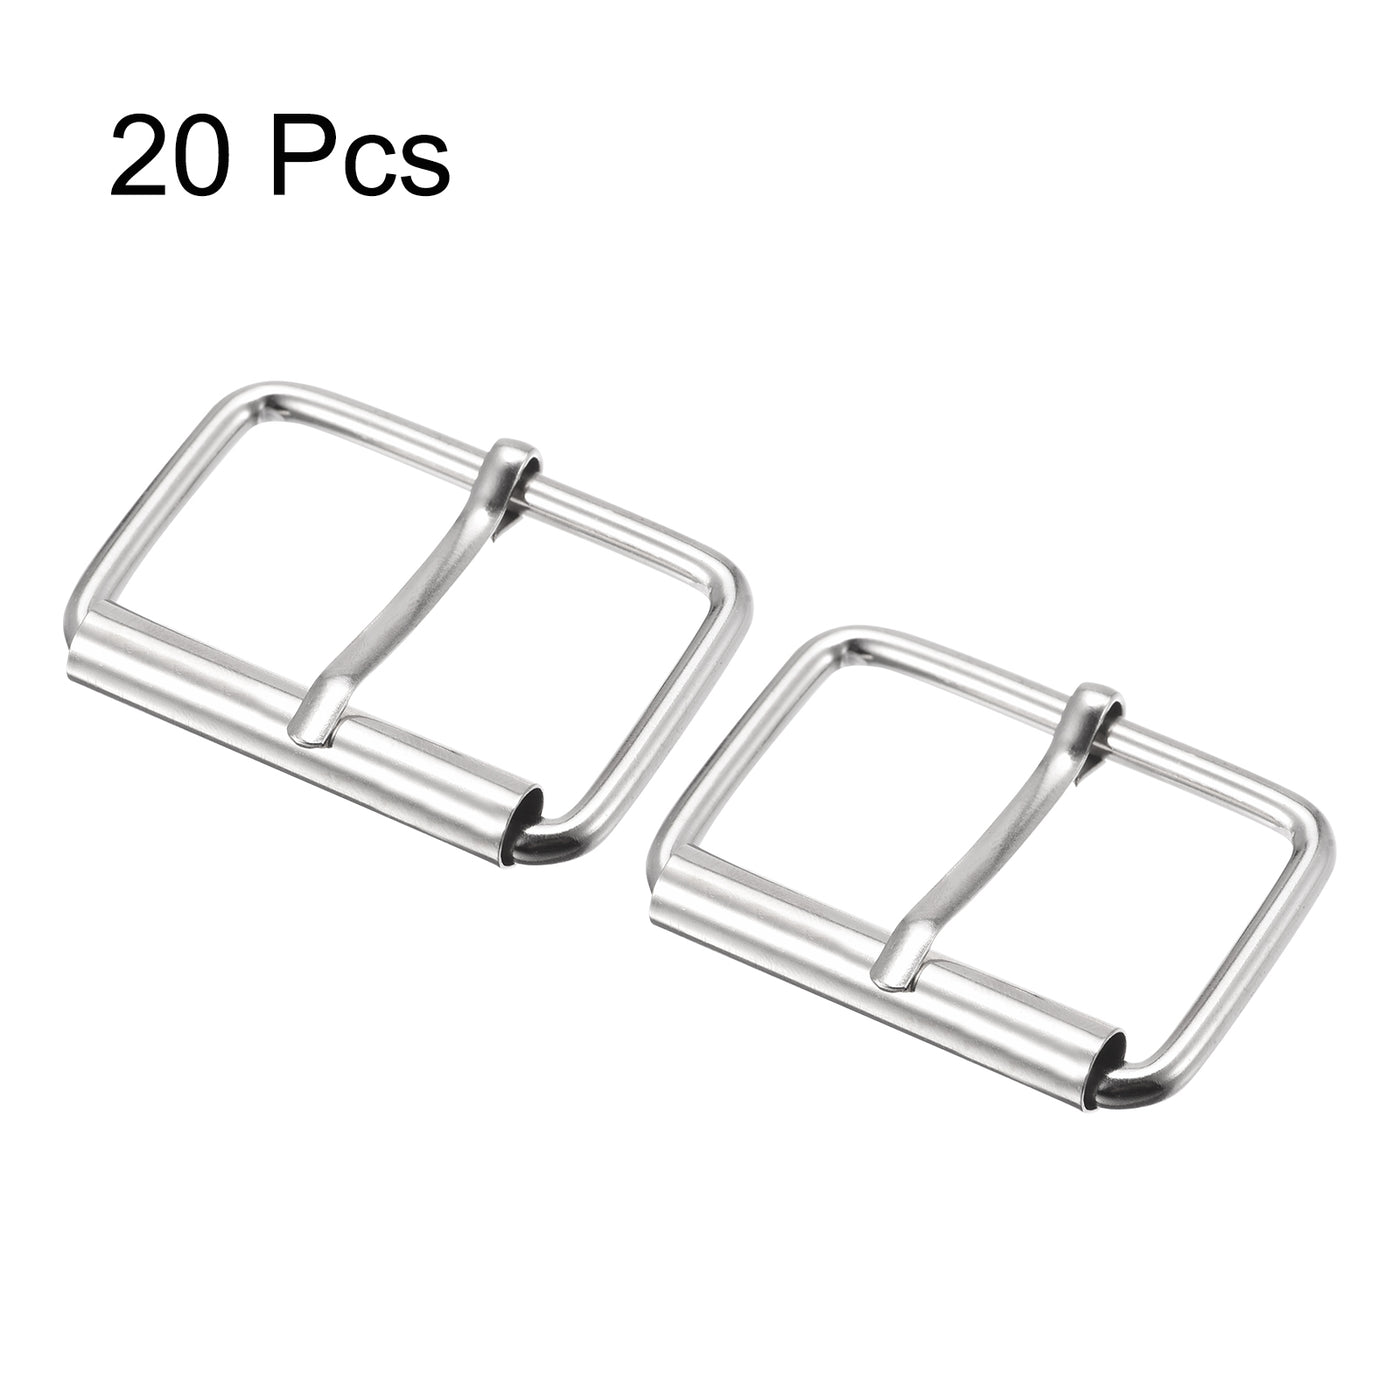 uxcell Uxcell 40mm(1.57") Metal Roller Buckles for Belts Bags Straps DIY Silver Tone 20pcs